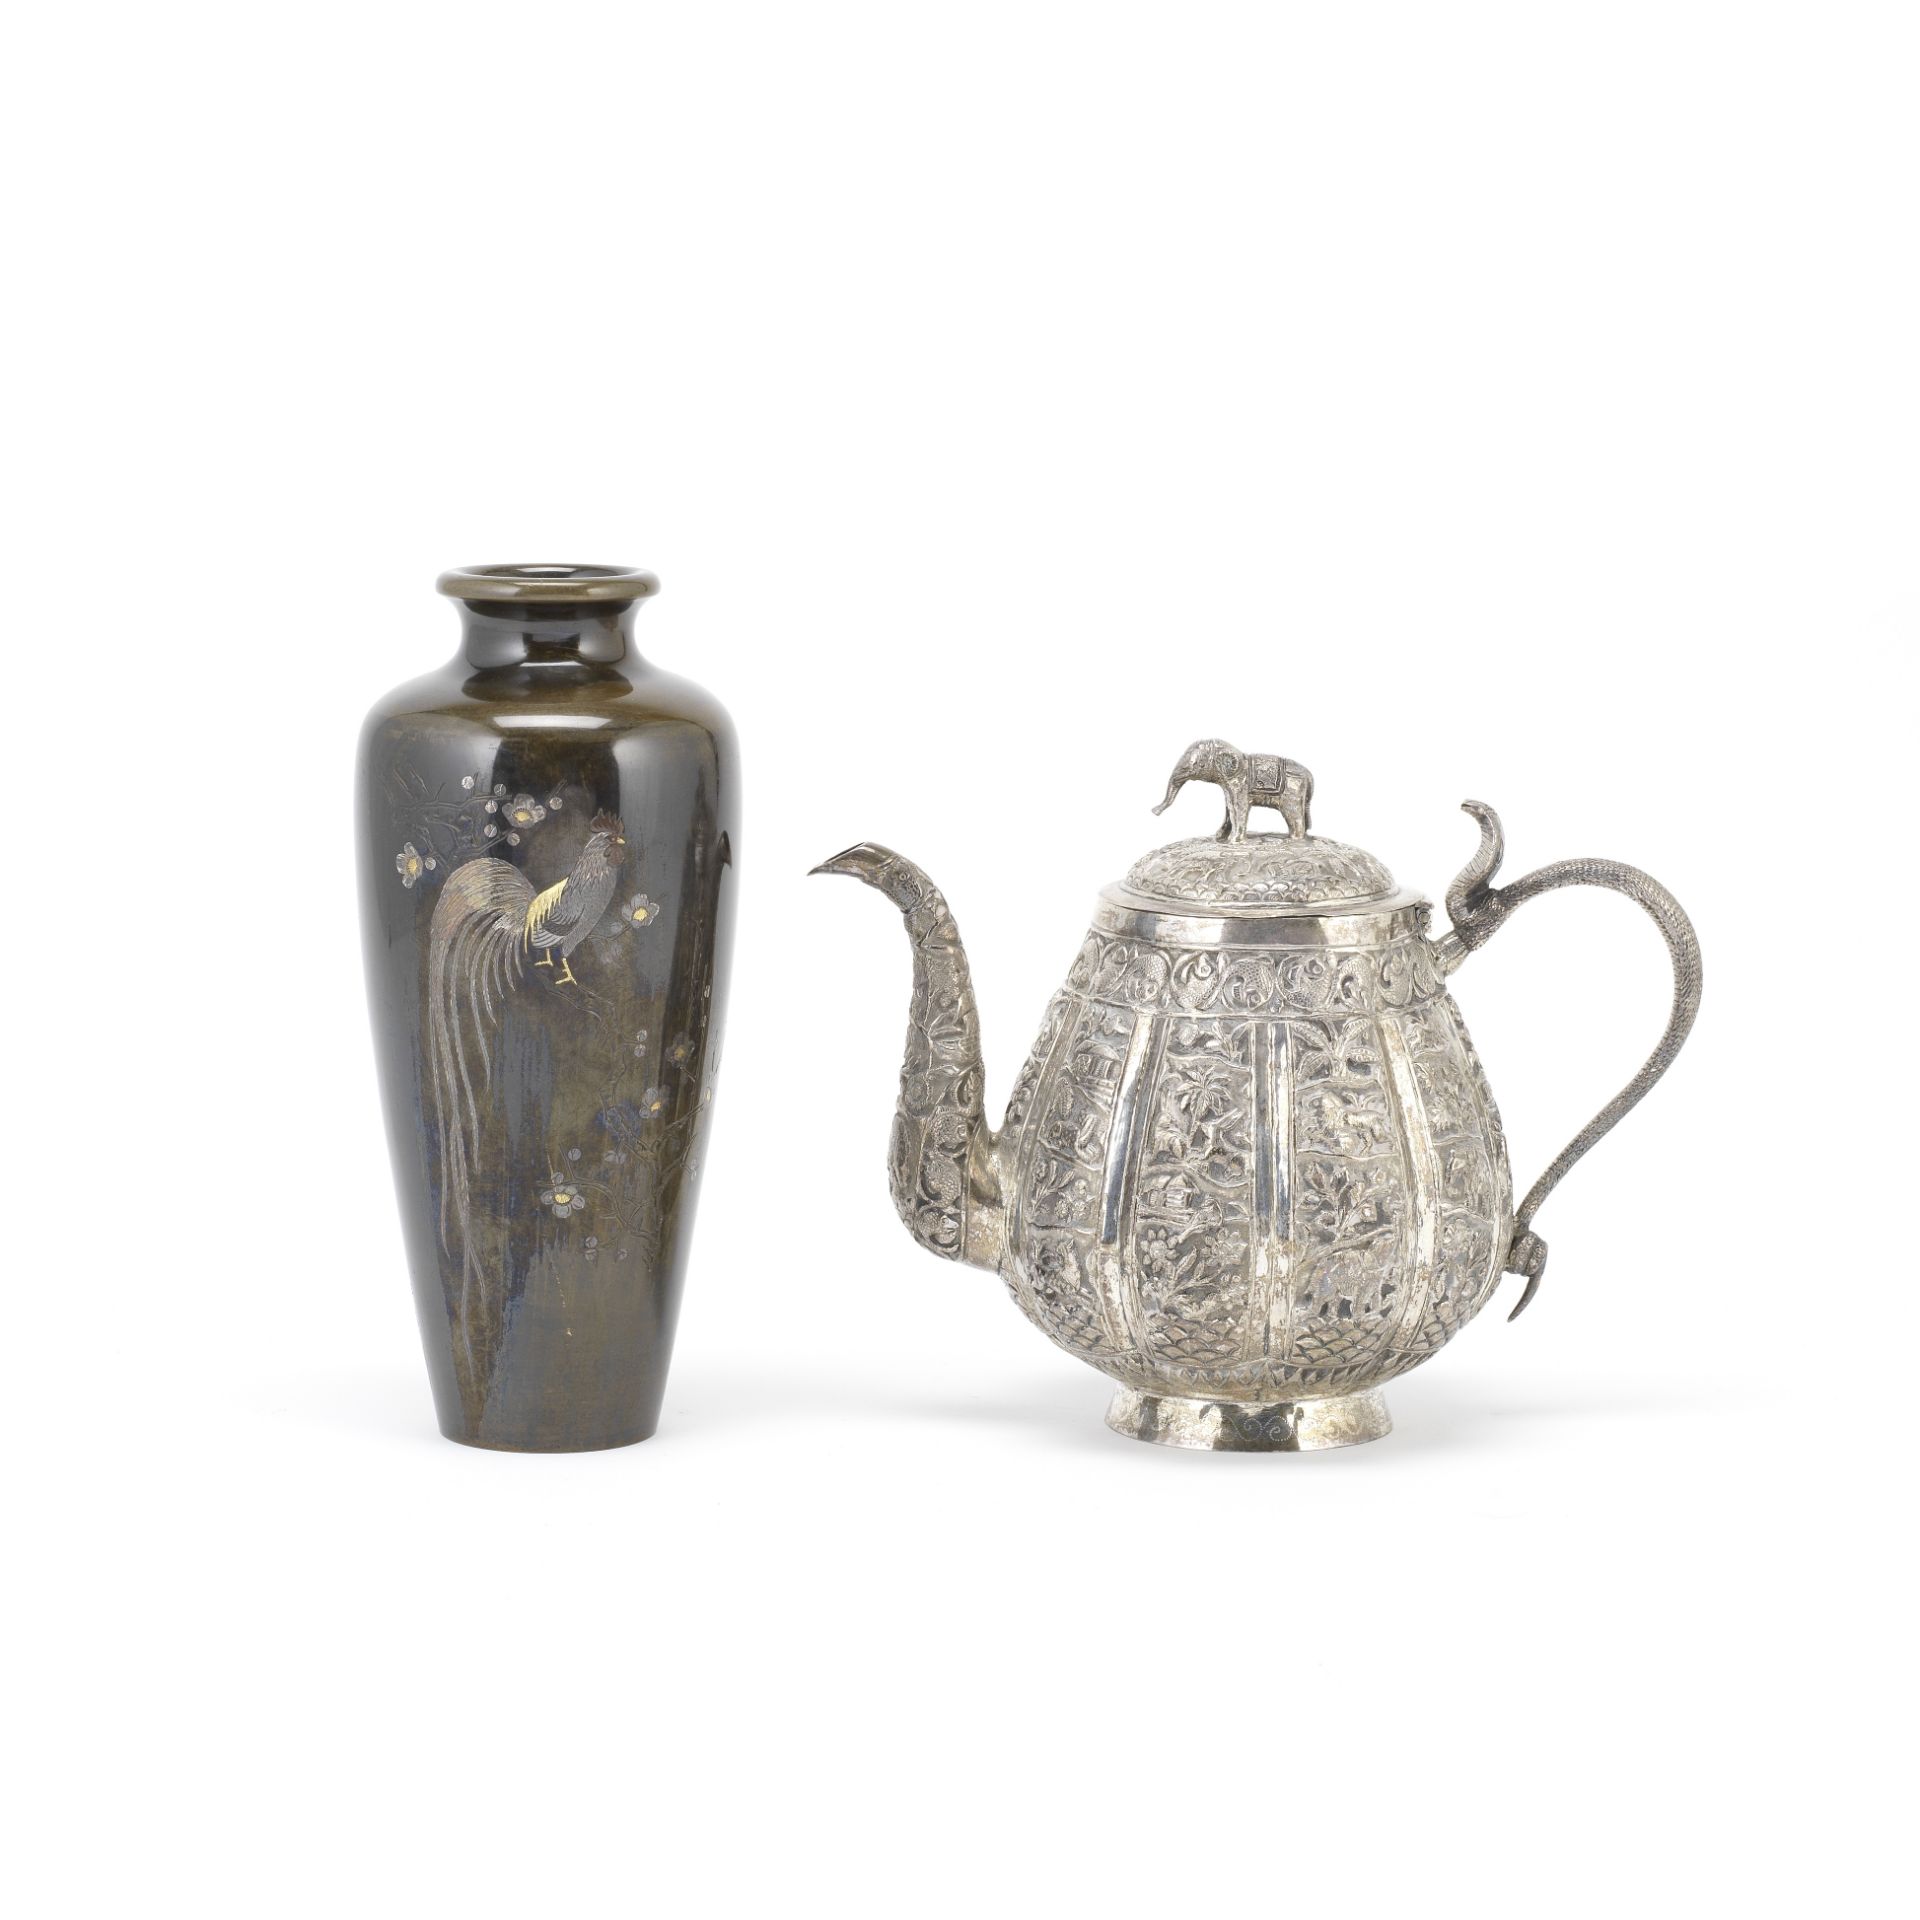 A JAPANESE INLAID METAL VASE AND AN INDIAN SILVER TEAPOT AND COVER 19th century (2)